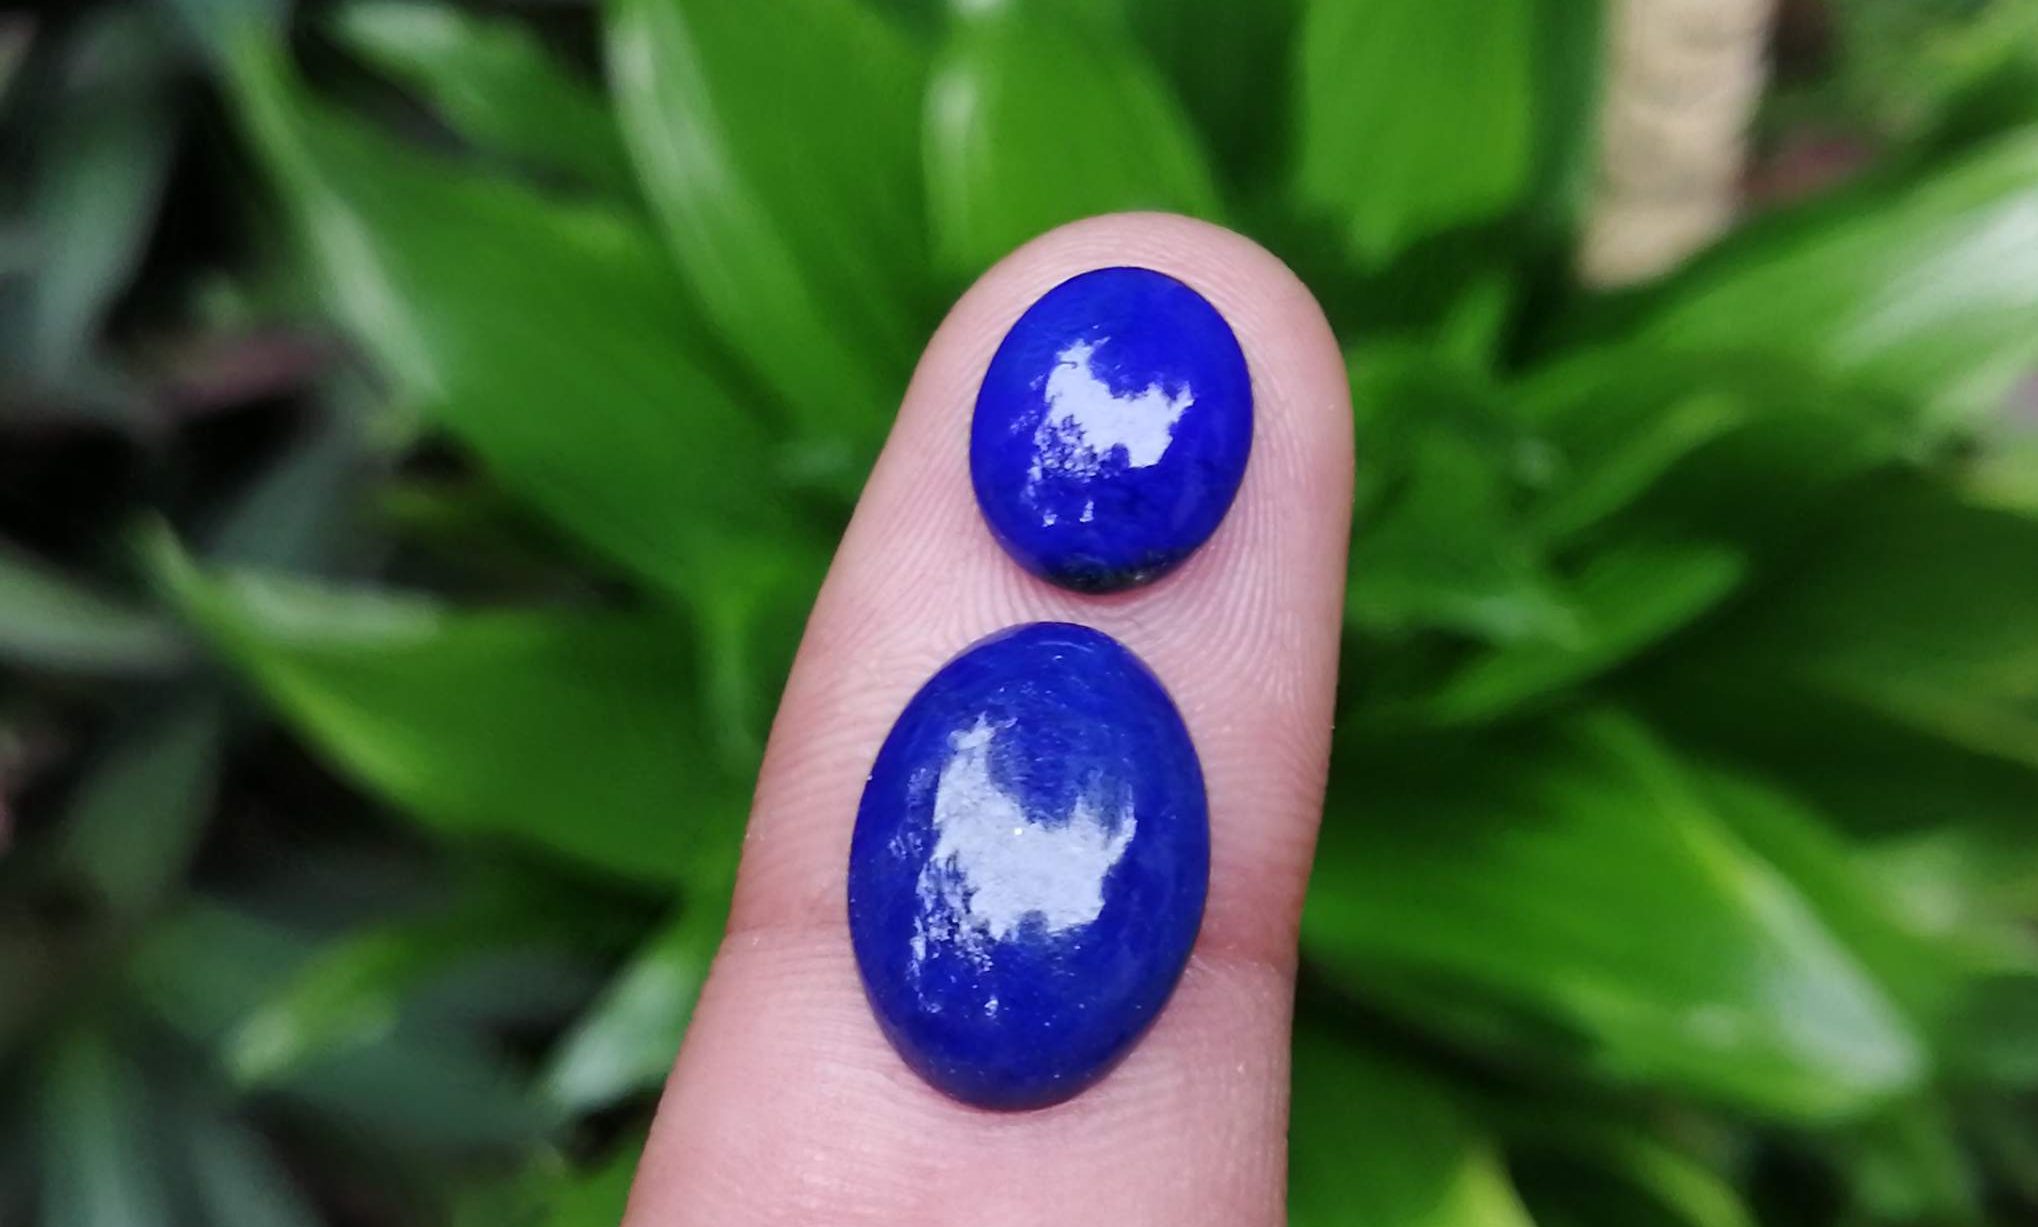 Weight : 4.55 Cts / 2.40 Cts Dimension : 14.0 x 10.0 x 4.0 mm 10.0 x 8.0 x 4.0 mm Colour : Blue Shape : Oval Treatment : Unheated Clarity : Opaque Lapis lazuli is a deep blue metamorphic ( arise from the transformation of existing rock types) rock used as a semi-precious stone, a mixture of minerals with lazurite as the main constituent. Lazurite is a tectosilicate mineral with sulfate, sulfur, and chloride. https://youtu.be/sczya3Xhk9o Lapis lazuli can be found colors such as Blue, or purple, mottled with white calcite and brassy pyrite. As Physical Properties, It has Uneven and Conchoidal fractures and a dull luster. Lapis Lazuli specific gravity is 2.7–2.9 with 5–5.5 hardness according to the Mohs hardness scale. The refractive index is Refractive Index1.500 to 1.670 as optical properties. The variations in composition cause a wide variation in the specific gravity, Refractive index and hardness values. At the end of the Middle Ages, lapis lazuli began to be exported to Europe, where it was ground into a powder and made into ultramarine, the finest and most expensive of all blue pigments. In ancient Egypt, lapis lazuli was a favorite stone for amulets and ornaments such as scarabs. Lapis lazuli is found in Afghanistan, Russia, Chile, Italy, Mongolia, Pakistan, the United States, and Canada. Afghanistan is the major source of lapis lazuli. Healing properties of Lapis lazuli 💎 Lapis lazuli associates with Throat Chakra and Third Eye Chakra. Lapis Lazuli activates the psychic centers at the Third Eye and balances the energies of the Throat Chakra. Also, Lapis lazuli is the September birthstone. Lapis Lazuli releases stress, bringing peace, harmony, and inner self-knowledge.  Lapis Lazuli boosts the immune system, purifies the blood and lowers blood pressure. Lapis is one of the oldest spiritual stones known to man, used by healers, priests and royalty, for power, wisdom and to stimulate psychic abilities and inner vision.